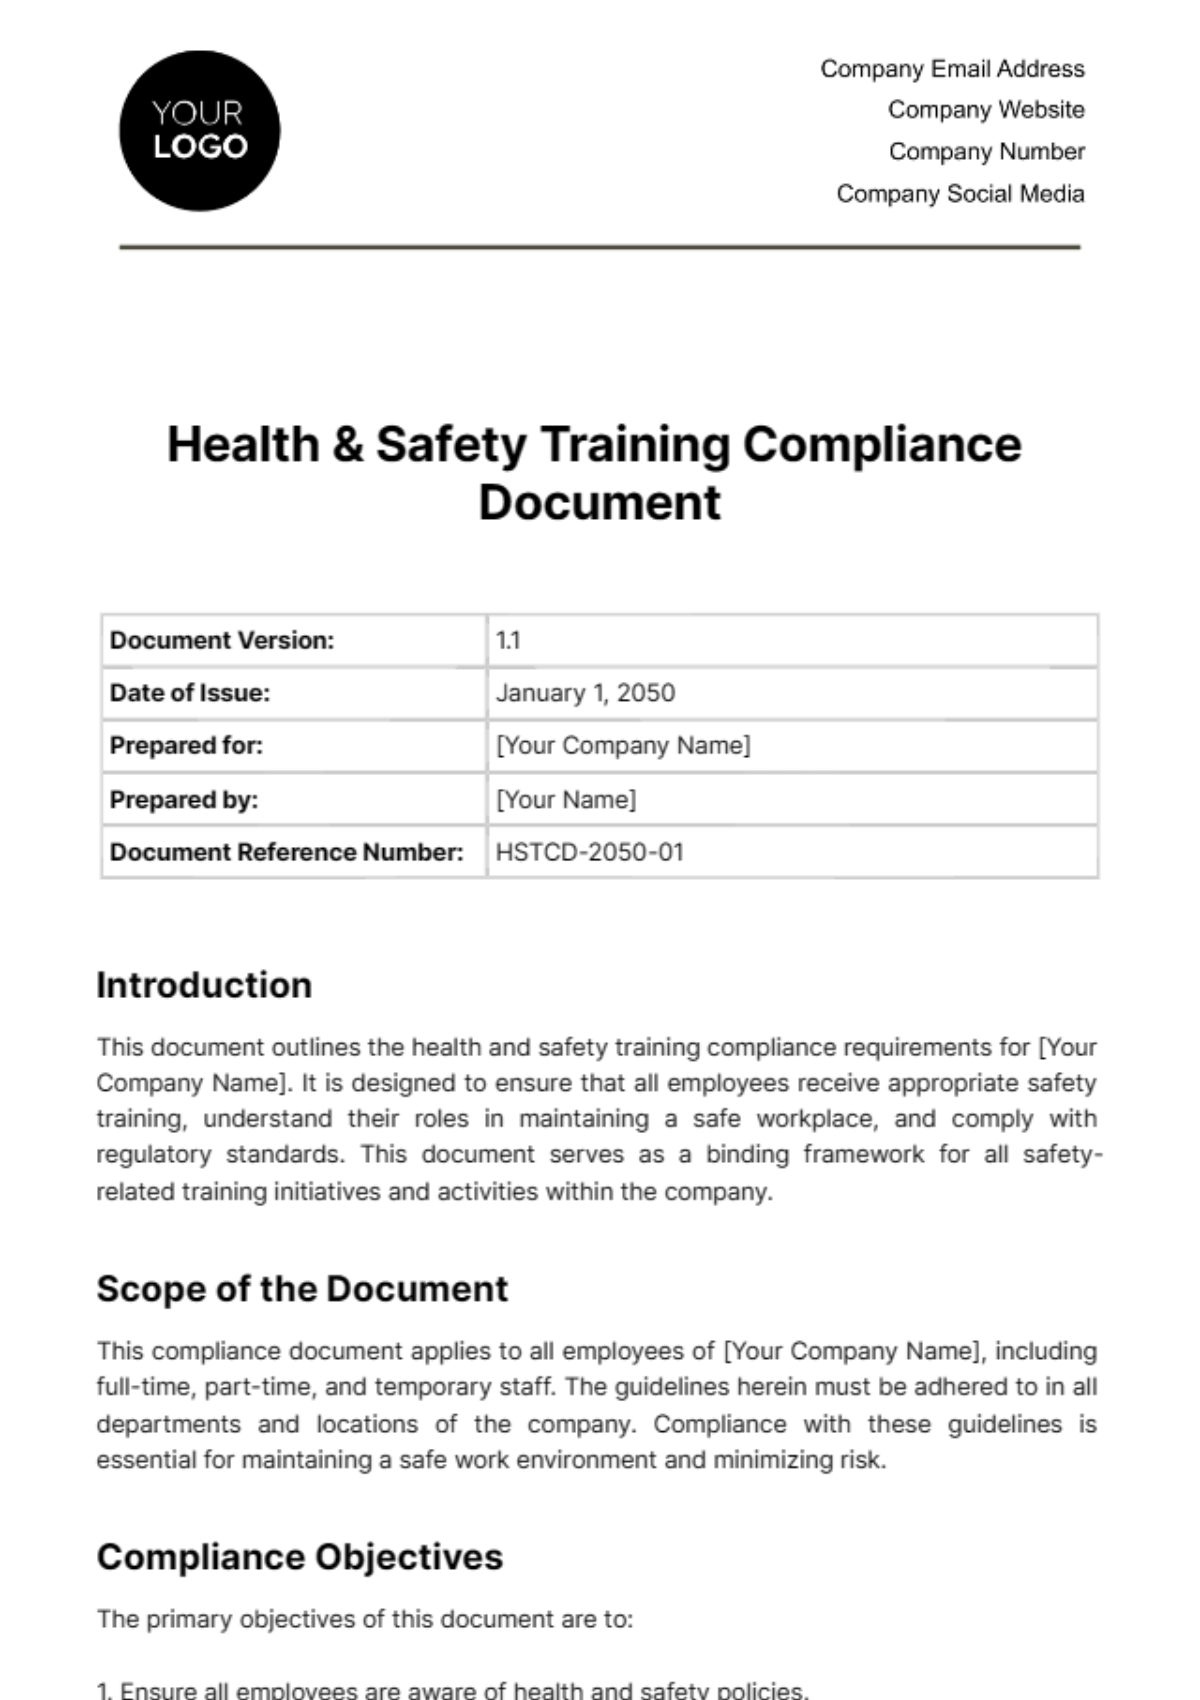 Health & Safety Training Compliance Document Template